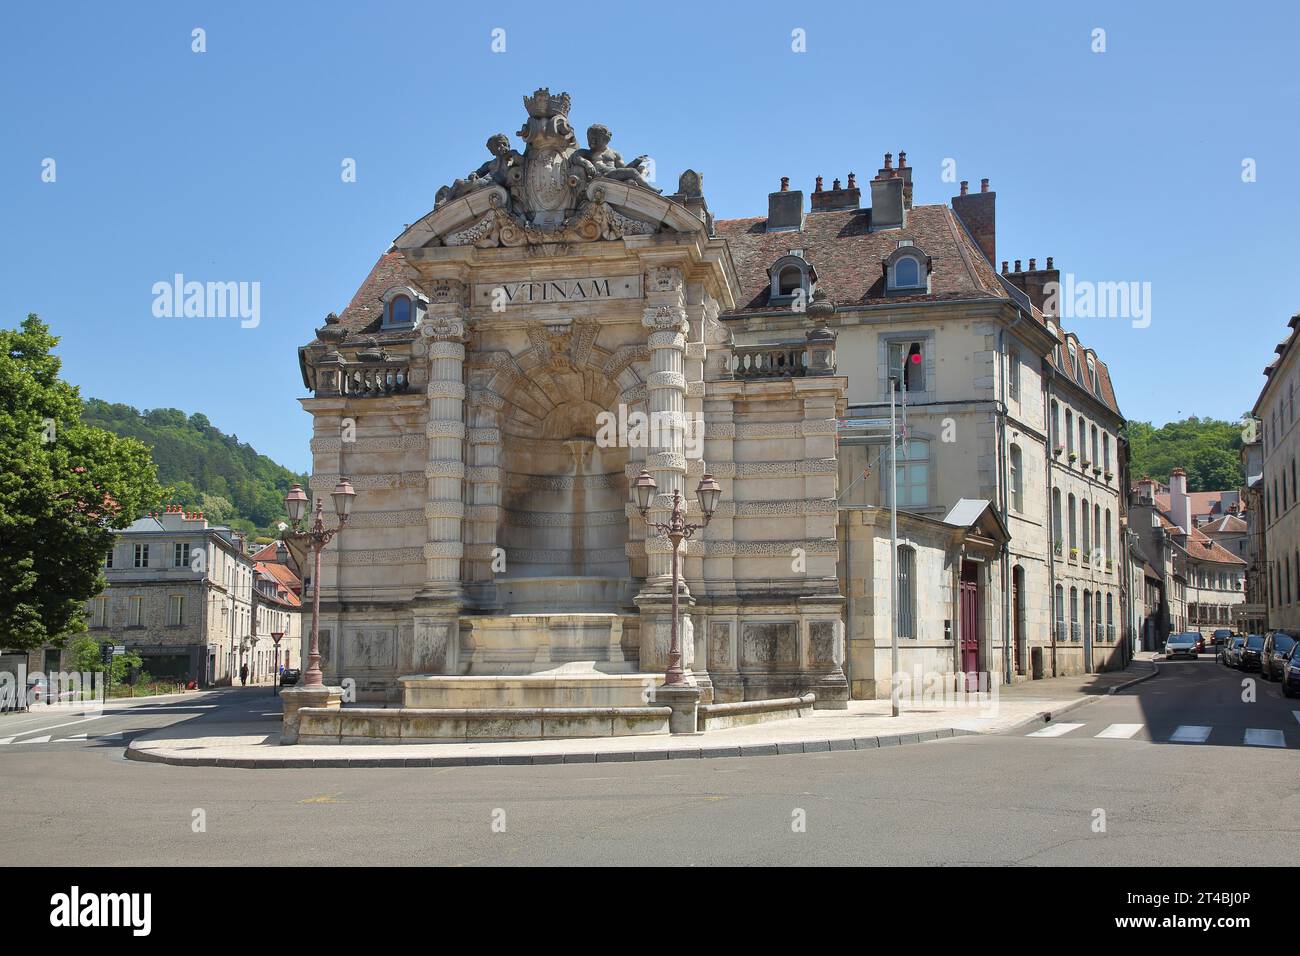 Fontaine Saint-Quentin built in 1529 on Place Jean Cornet, ornamental fountain with columns, decorations and figures, Besancon, Besancon, Doubs Stock Photo